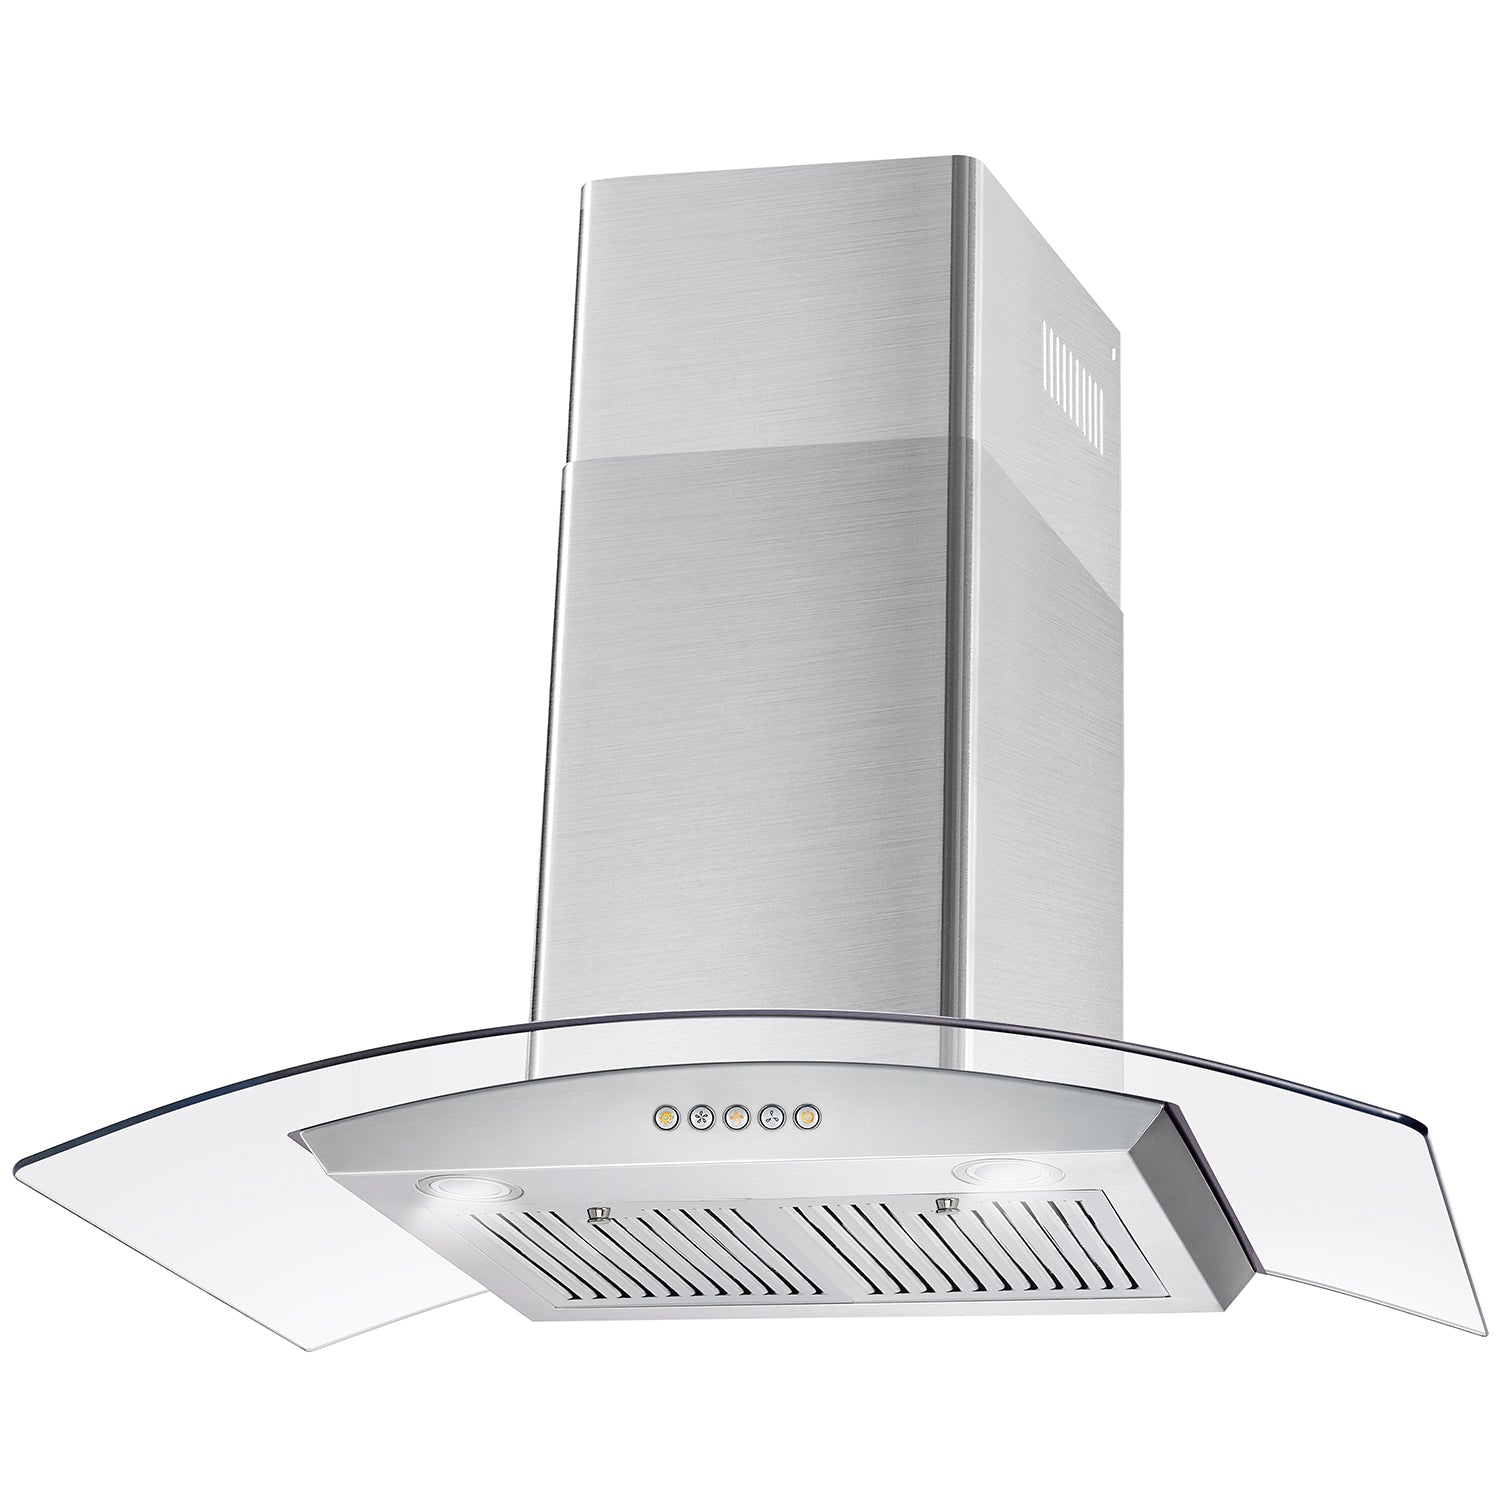 Cosmo - 36 in. Ductless Wall Mount Range Hood in Stainless Steel with LED Lighting and Carbon Filter Kit for Recirculating | COS-668A900-DL